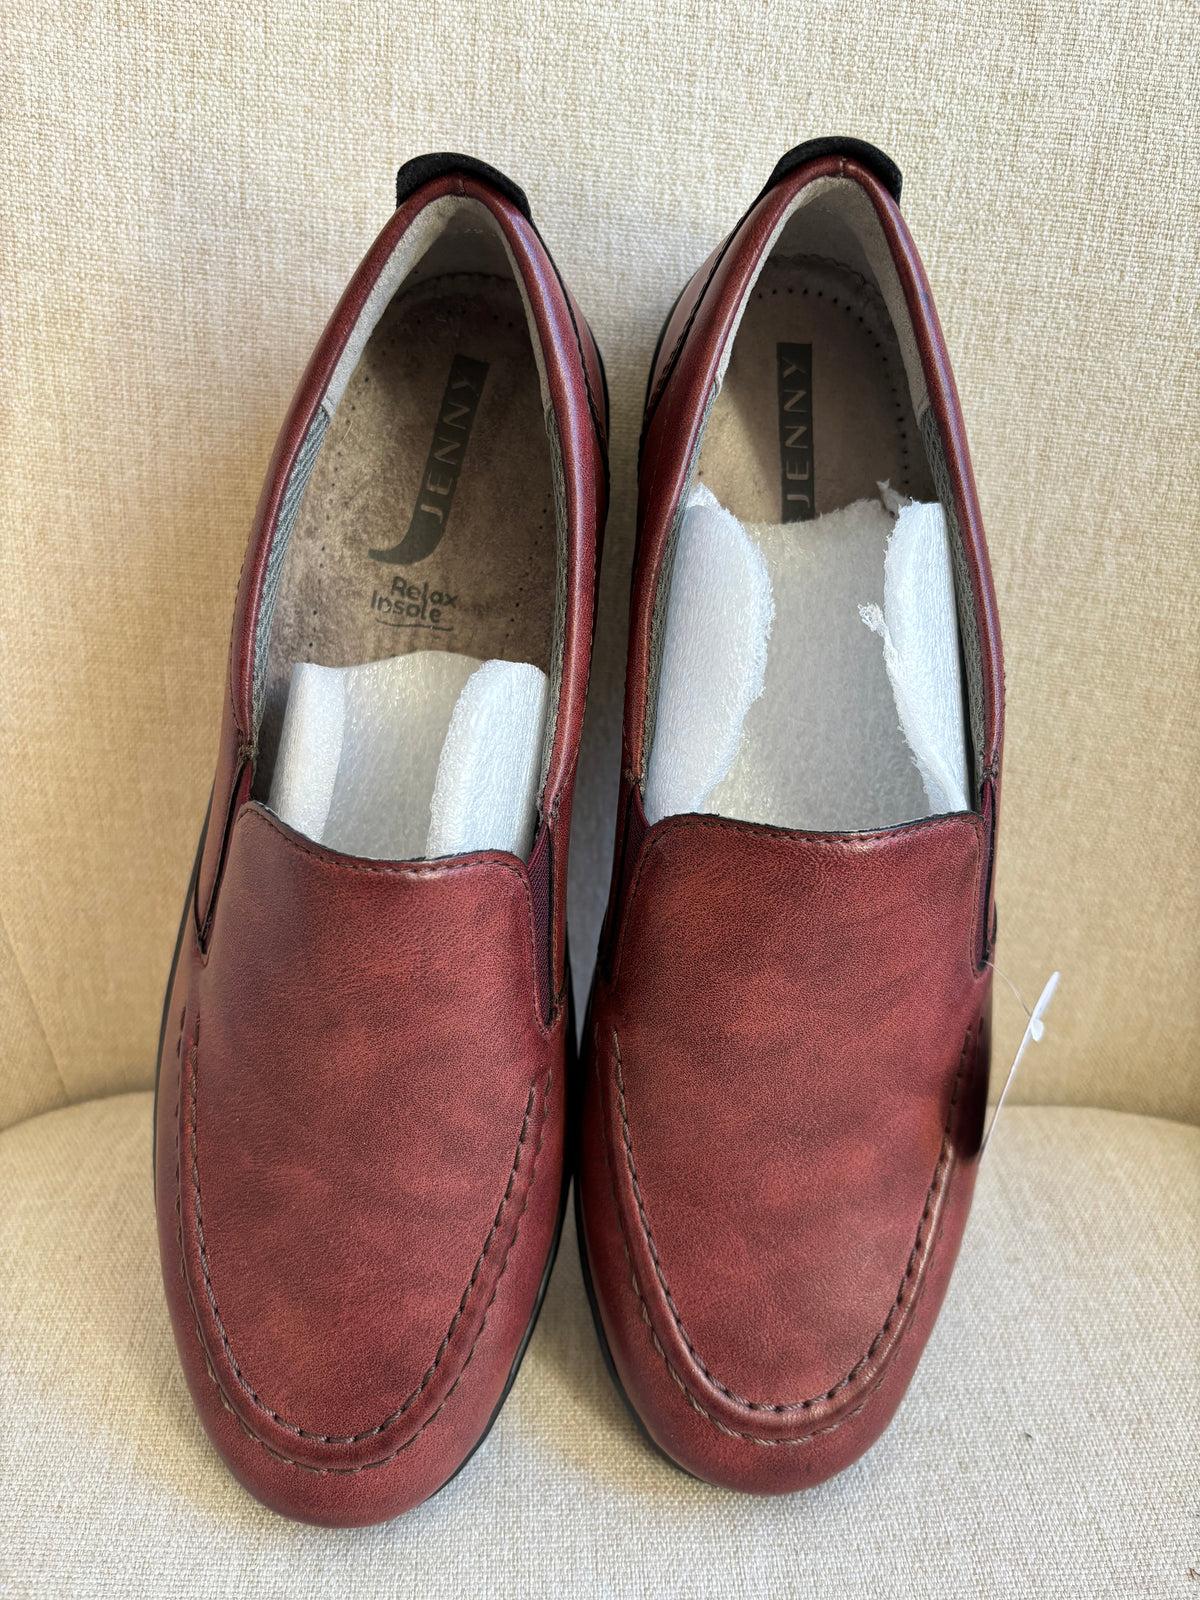 Real leather luxury loafers by Jenny